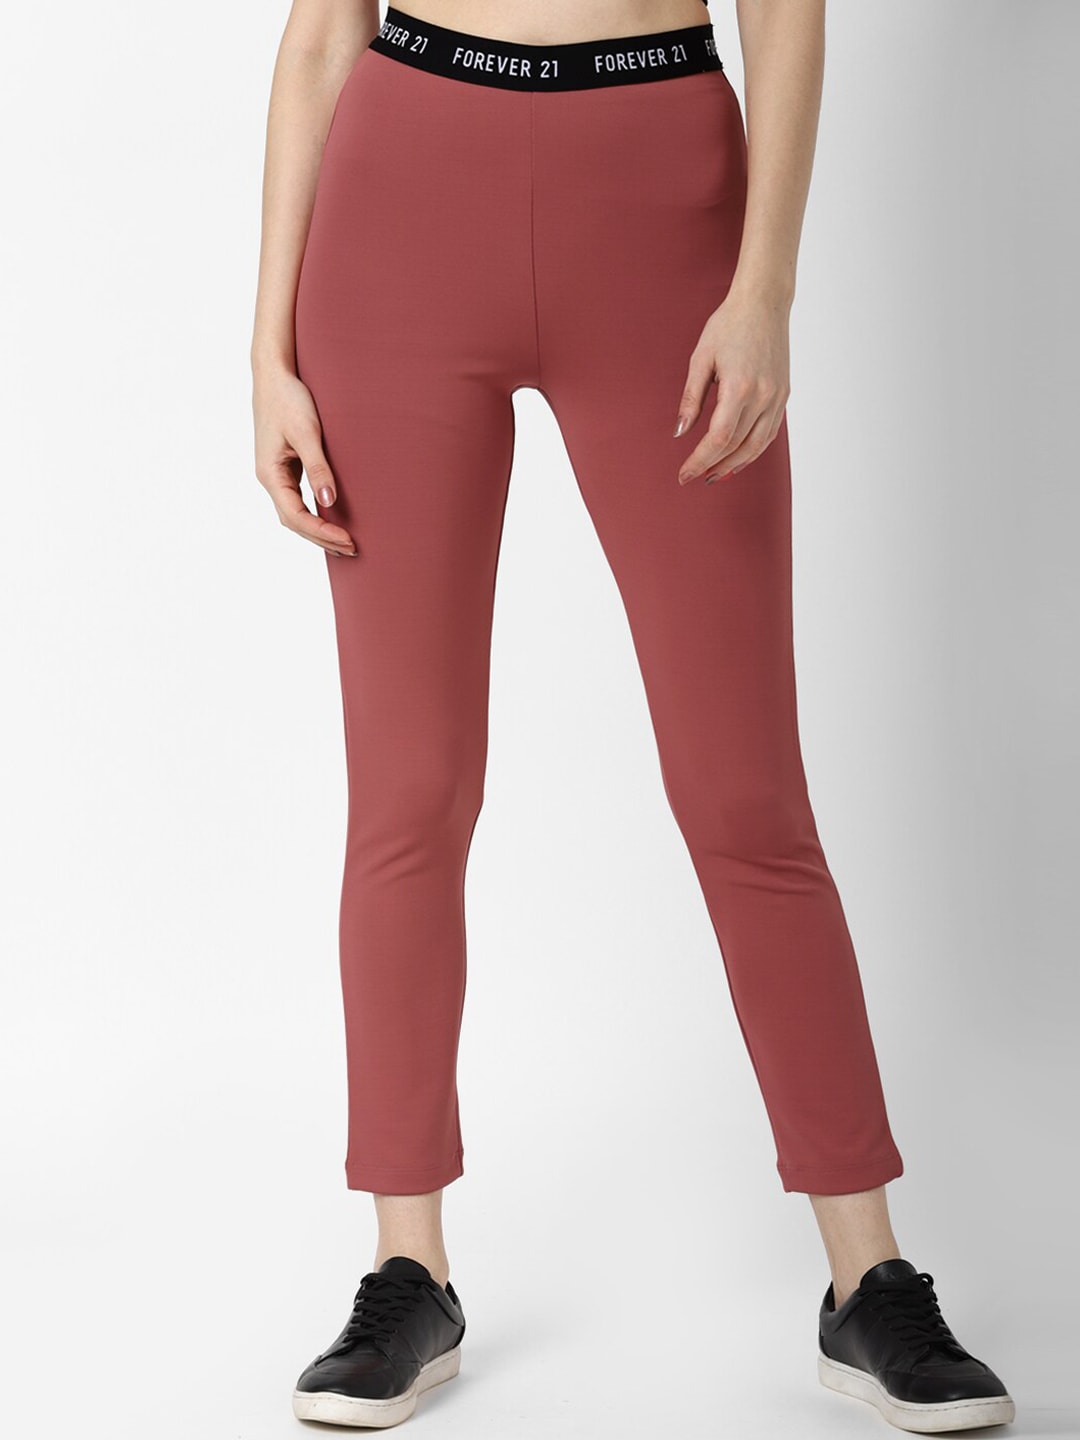 FOREVER 21 Women Pink Solid Tights Price in India